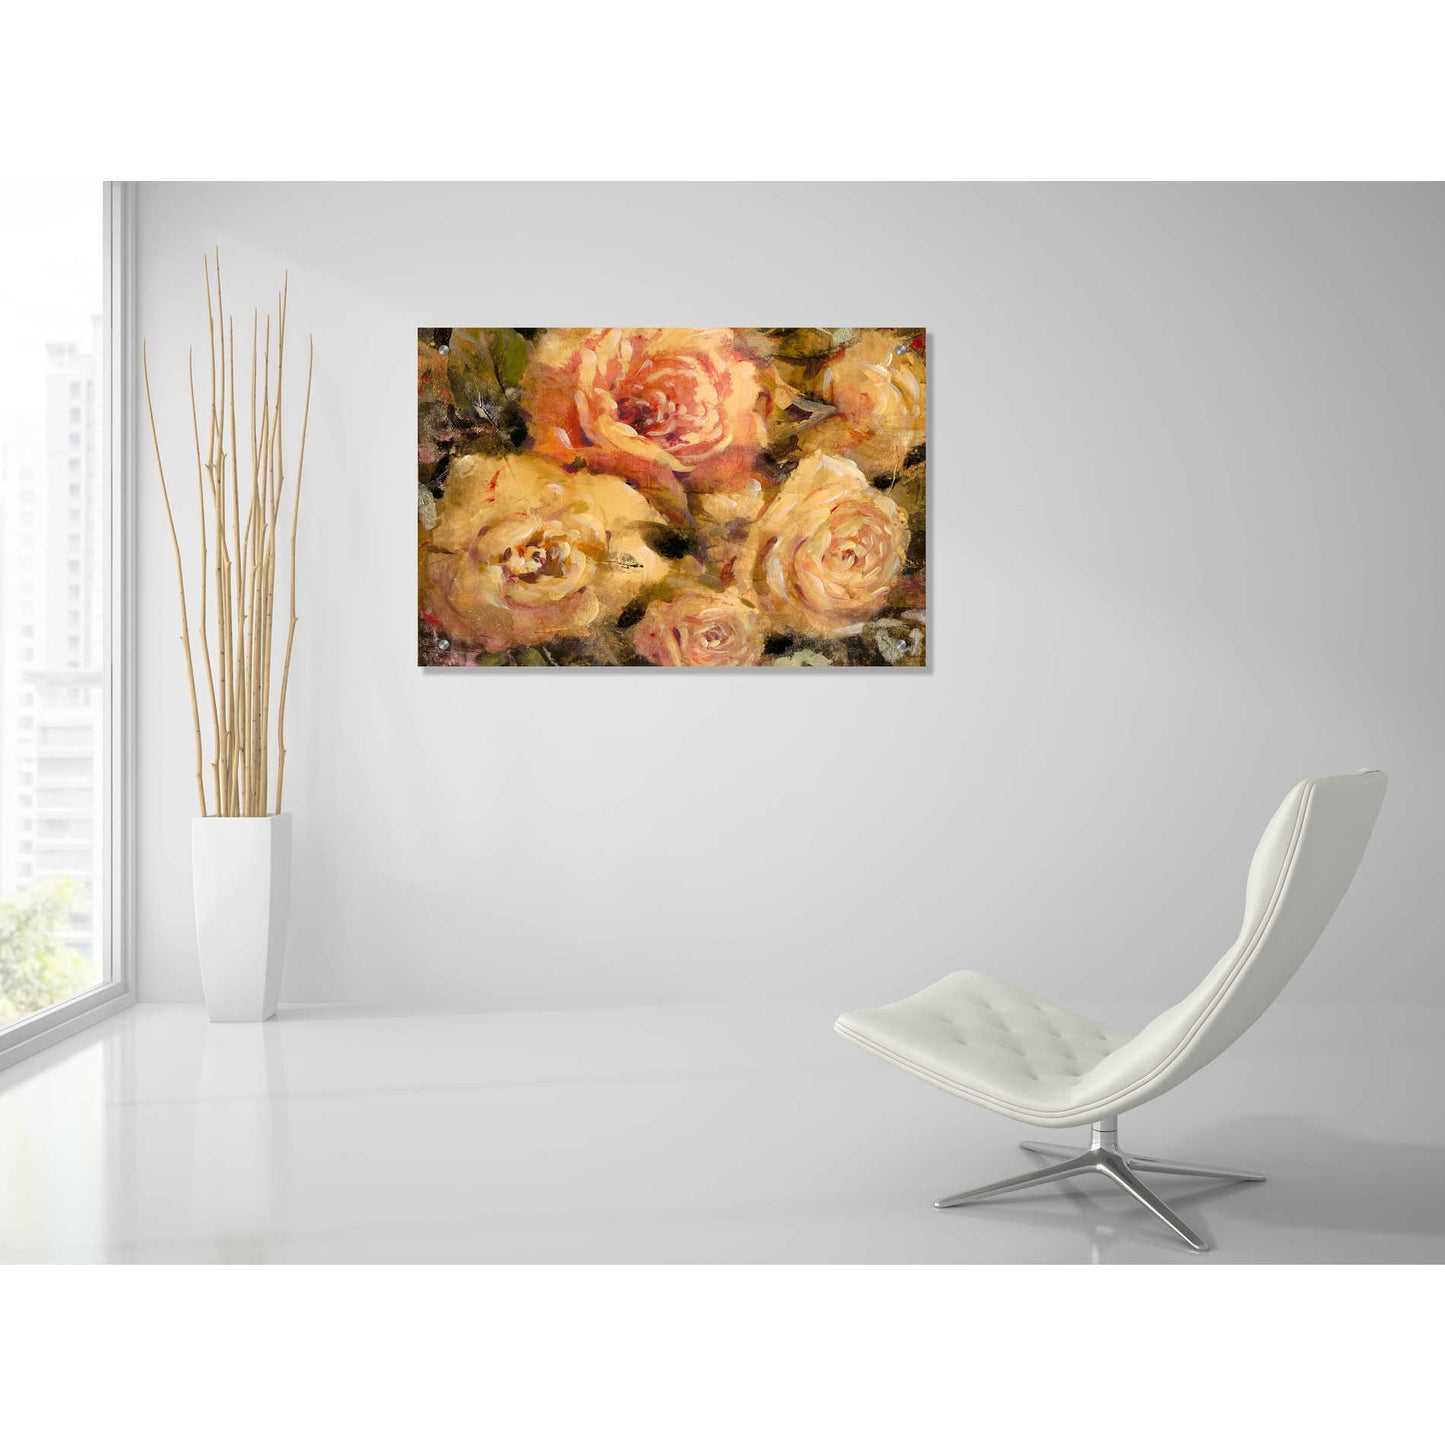 Epic Art 'Floral in Bloom II' by Tim O'Toole, Acrylic Glass Wall Art,36x24